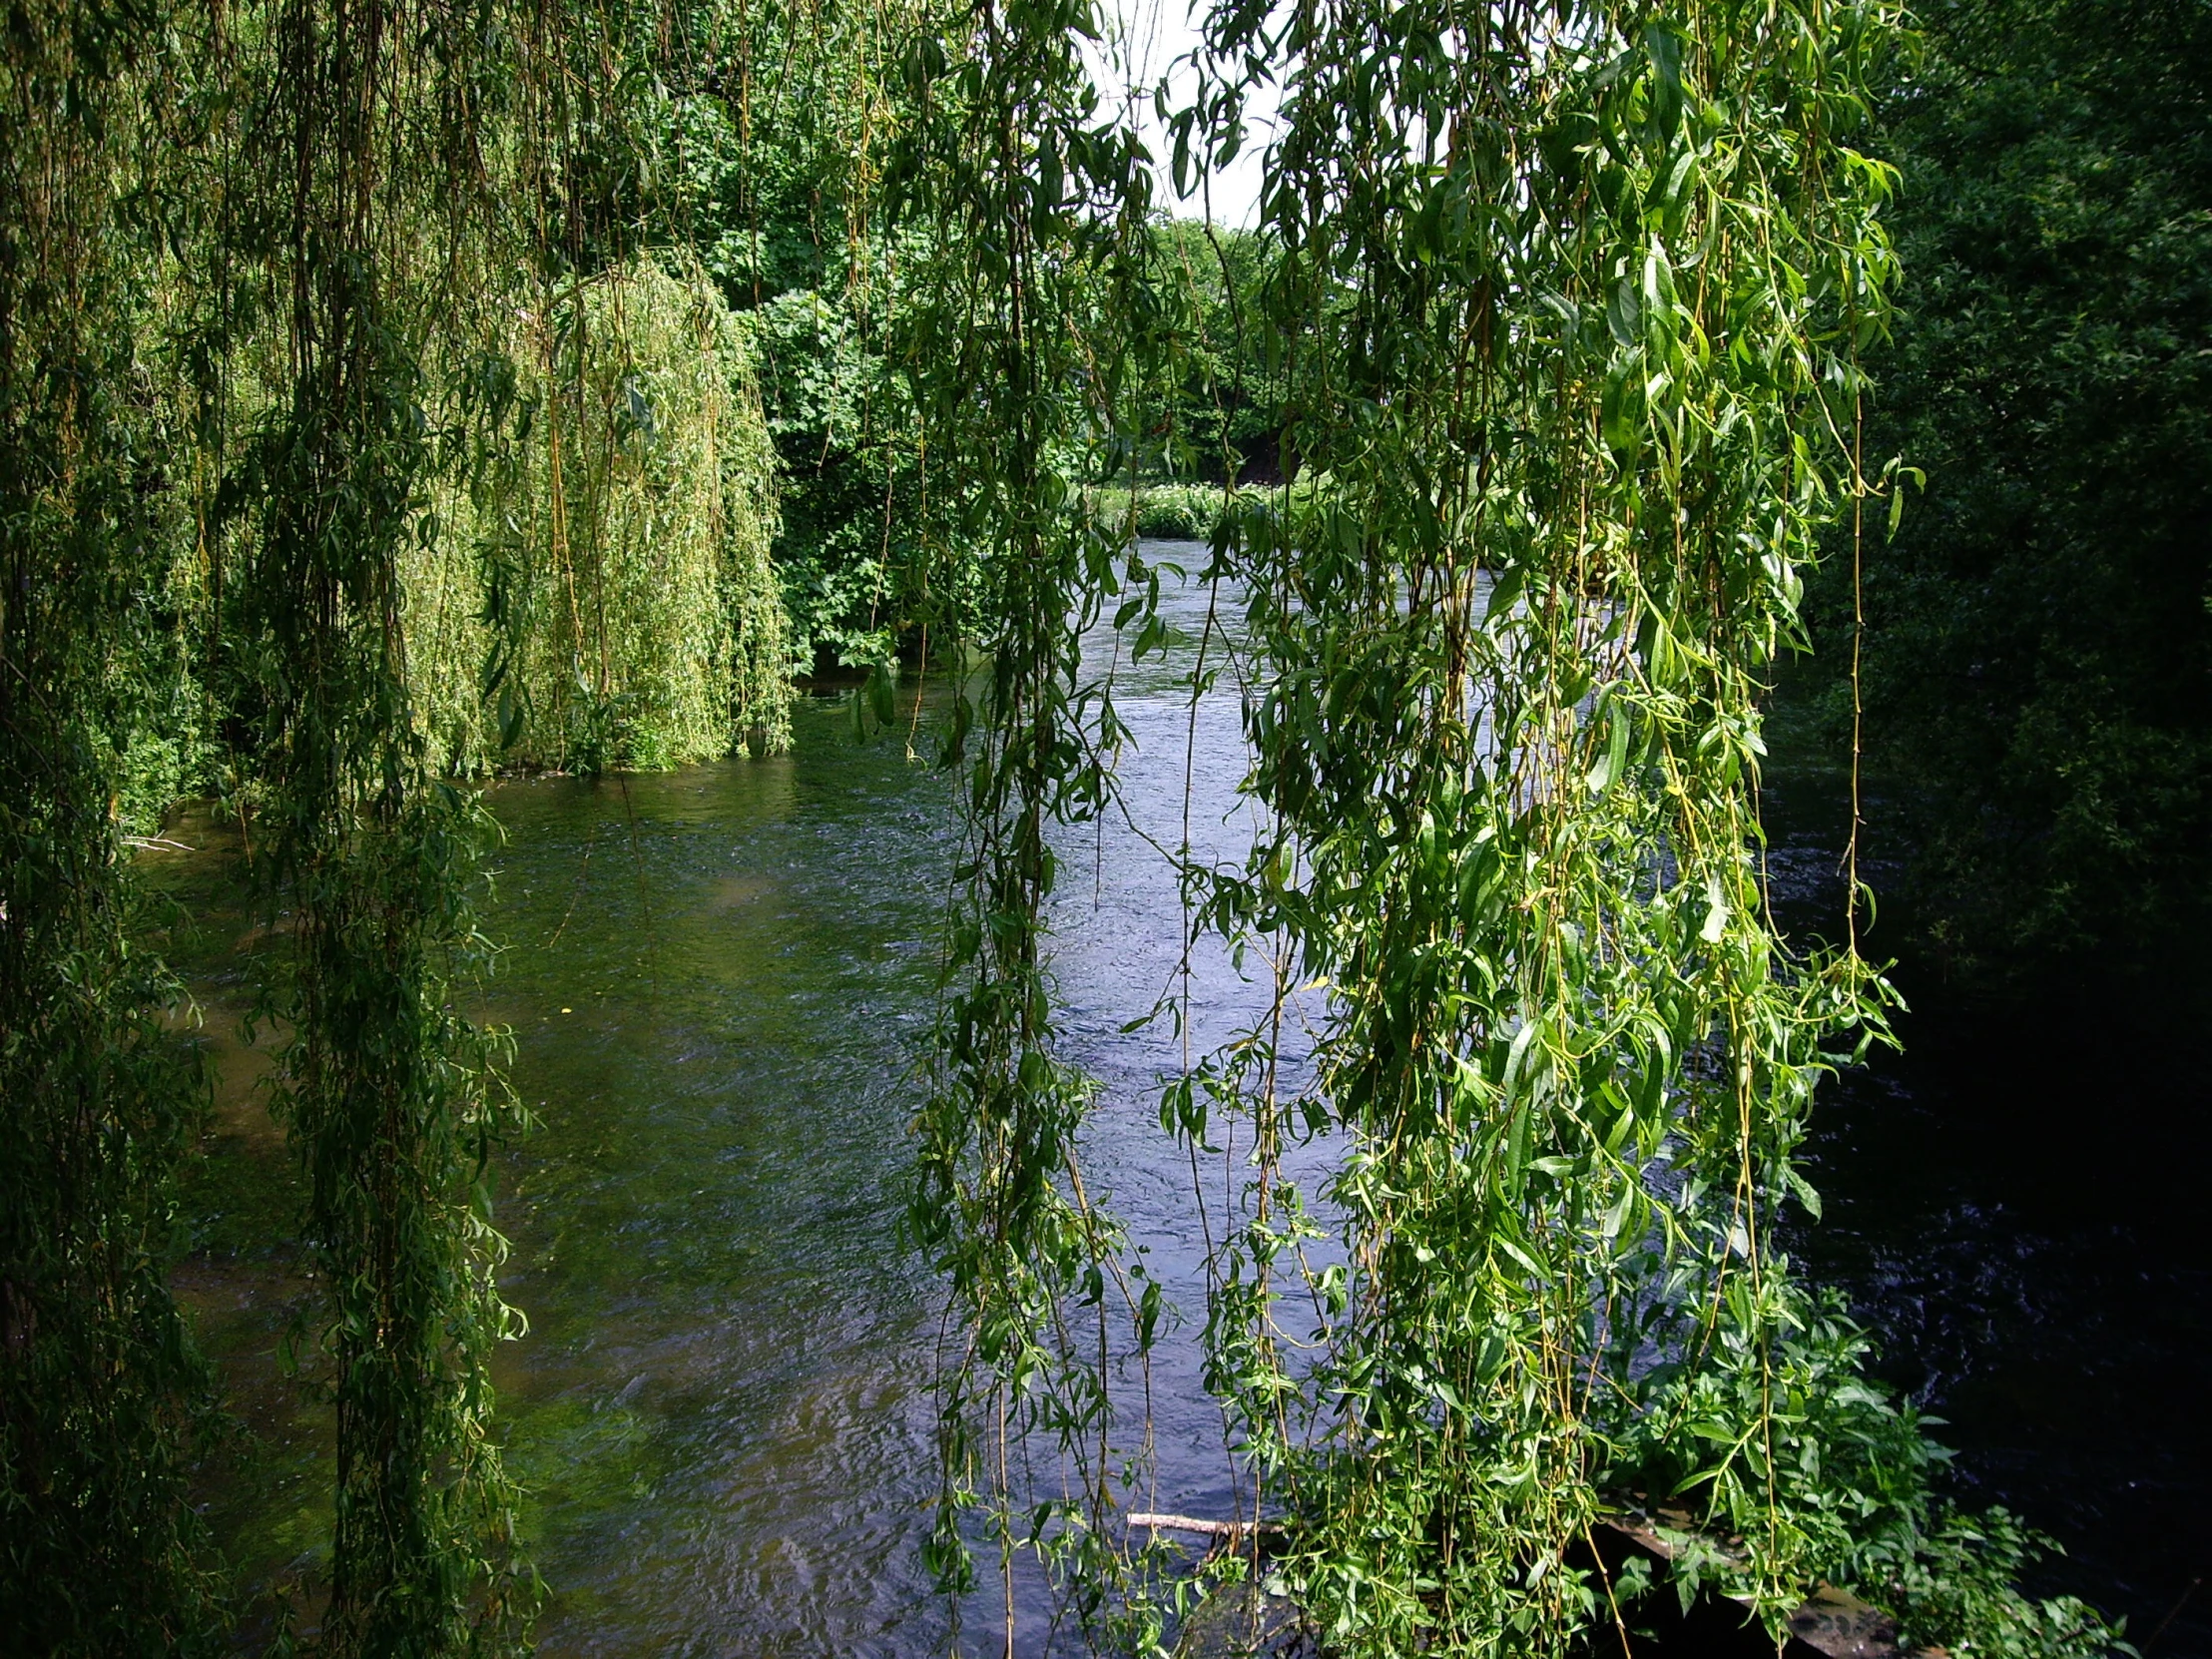 a river surrounded by many lush green trees